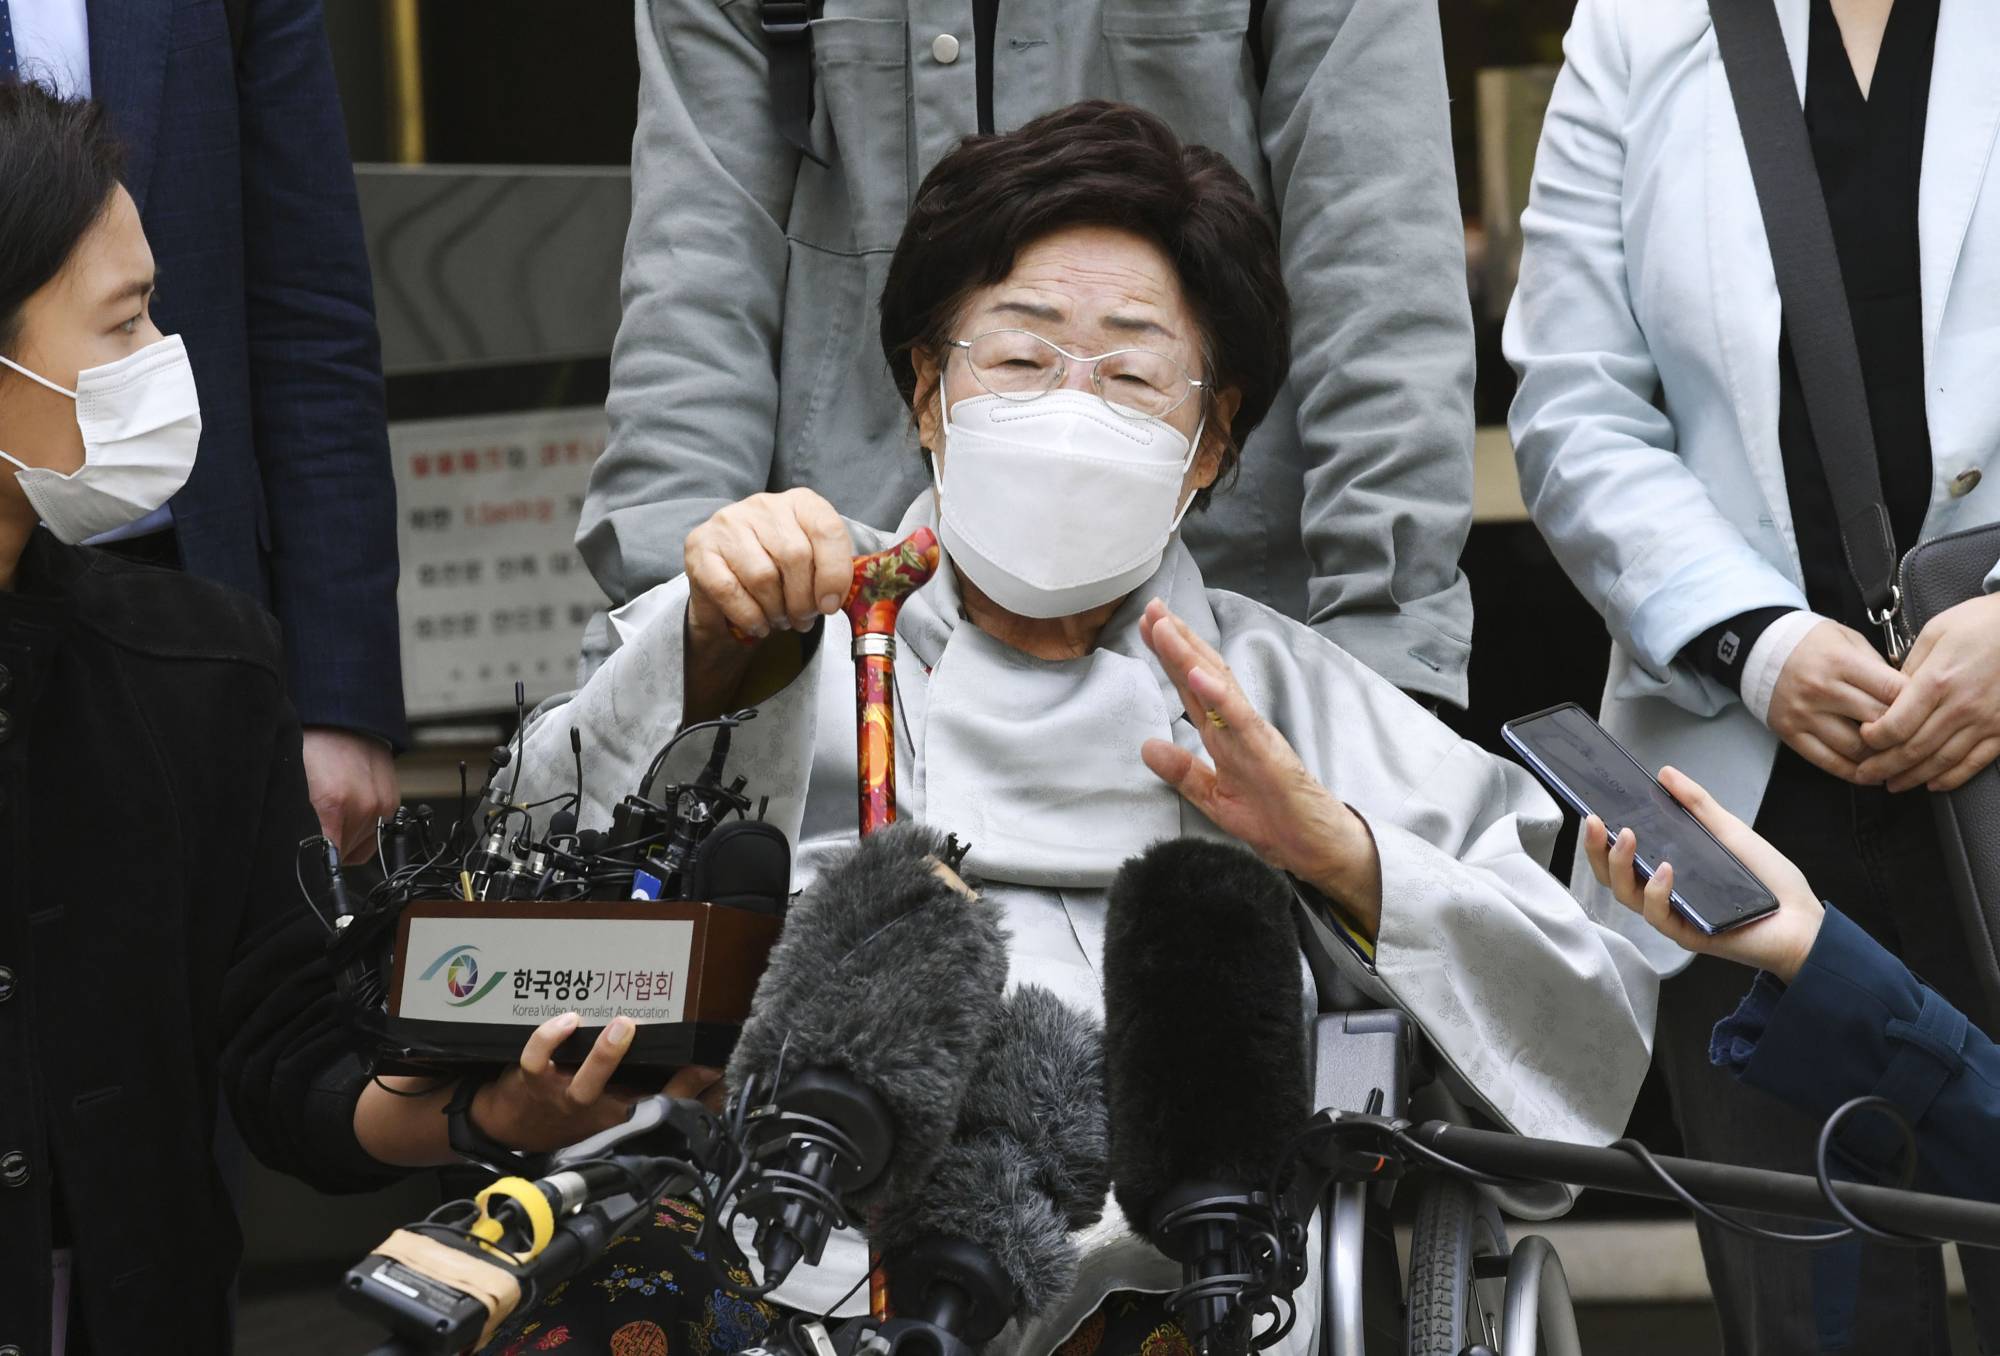 Former 'comfort woman' Lee Yong-soo speaks to reporters Wednesday after the Seoul Central District Court dismissed a damages lawsuit brought by a group of former comfort women against the Japanese government. | KYODO